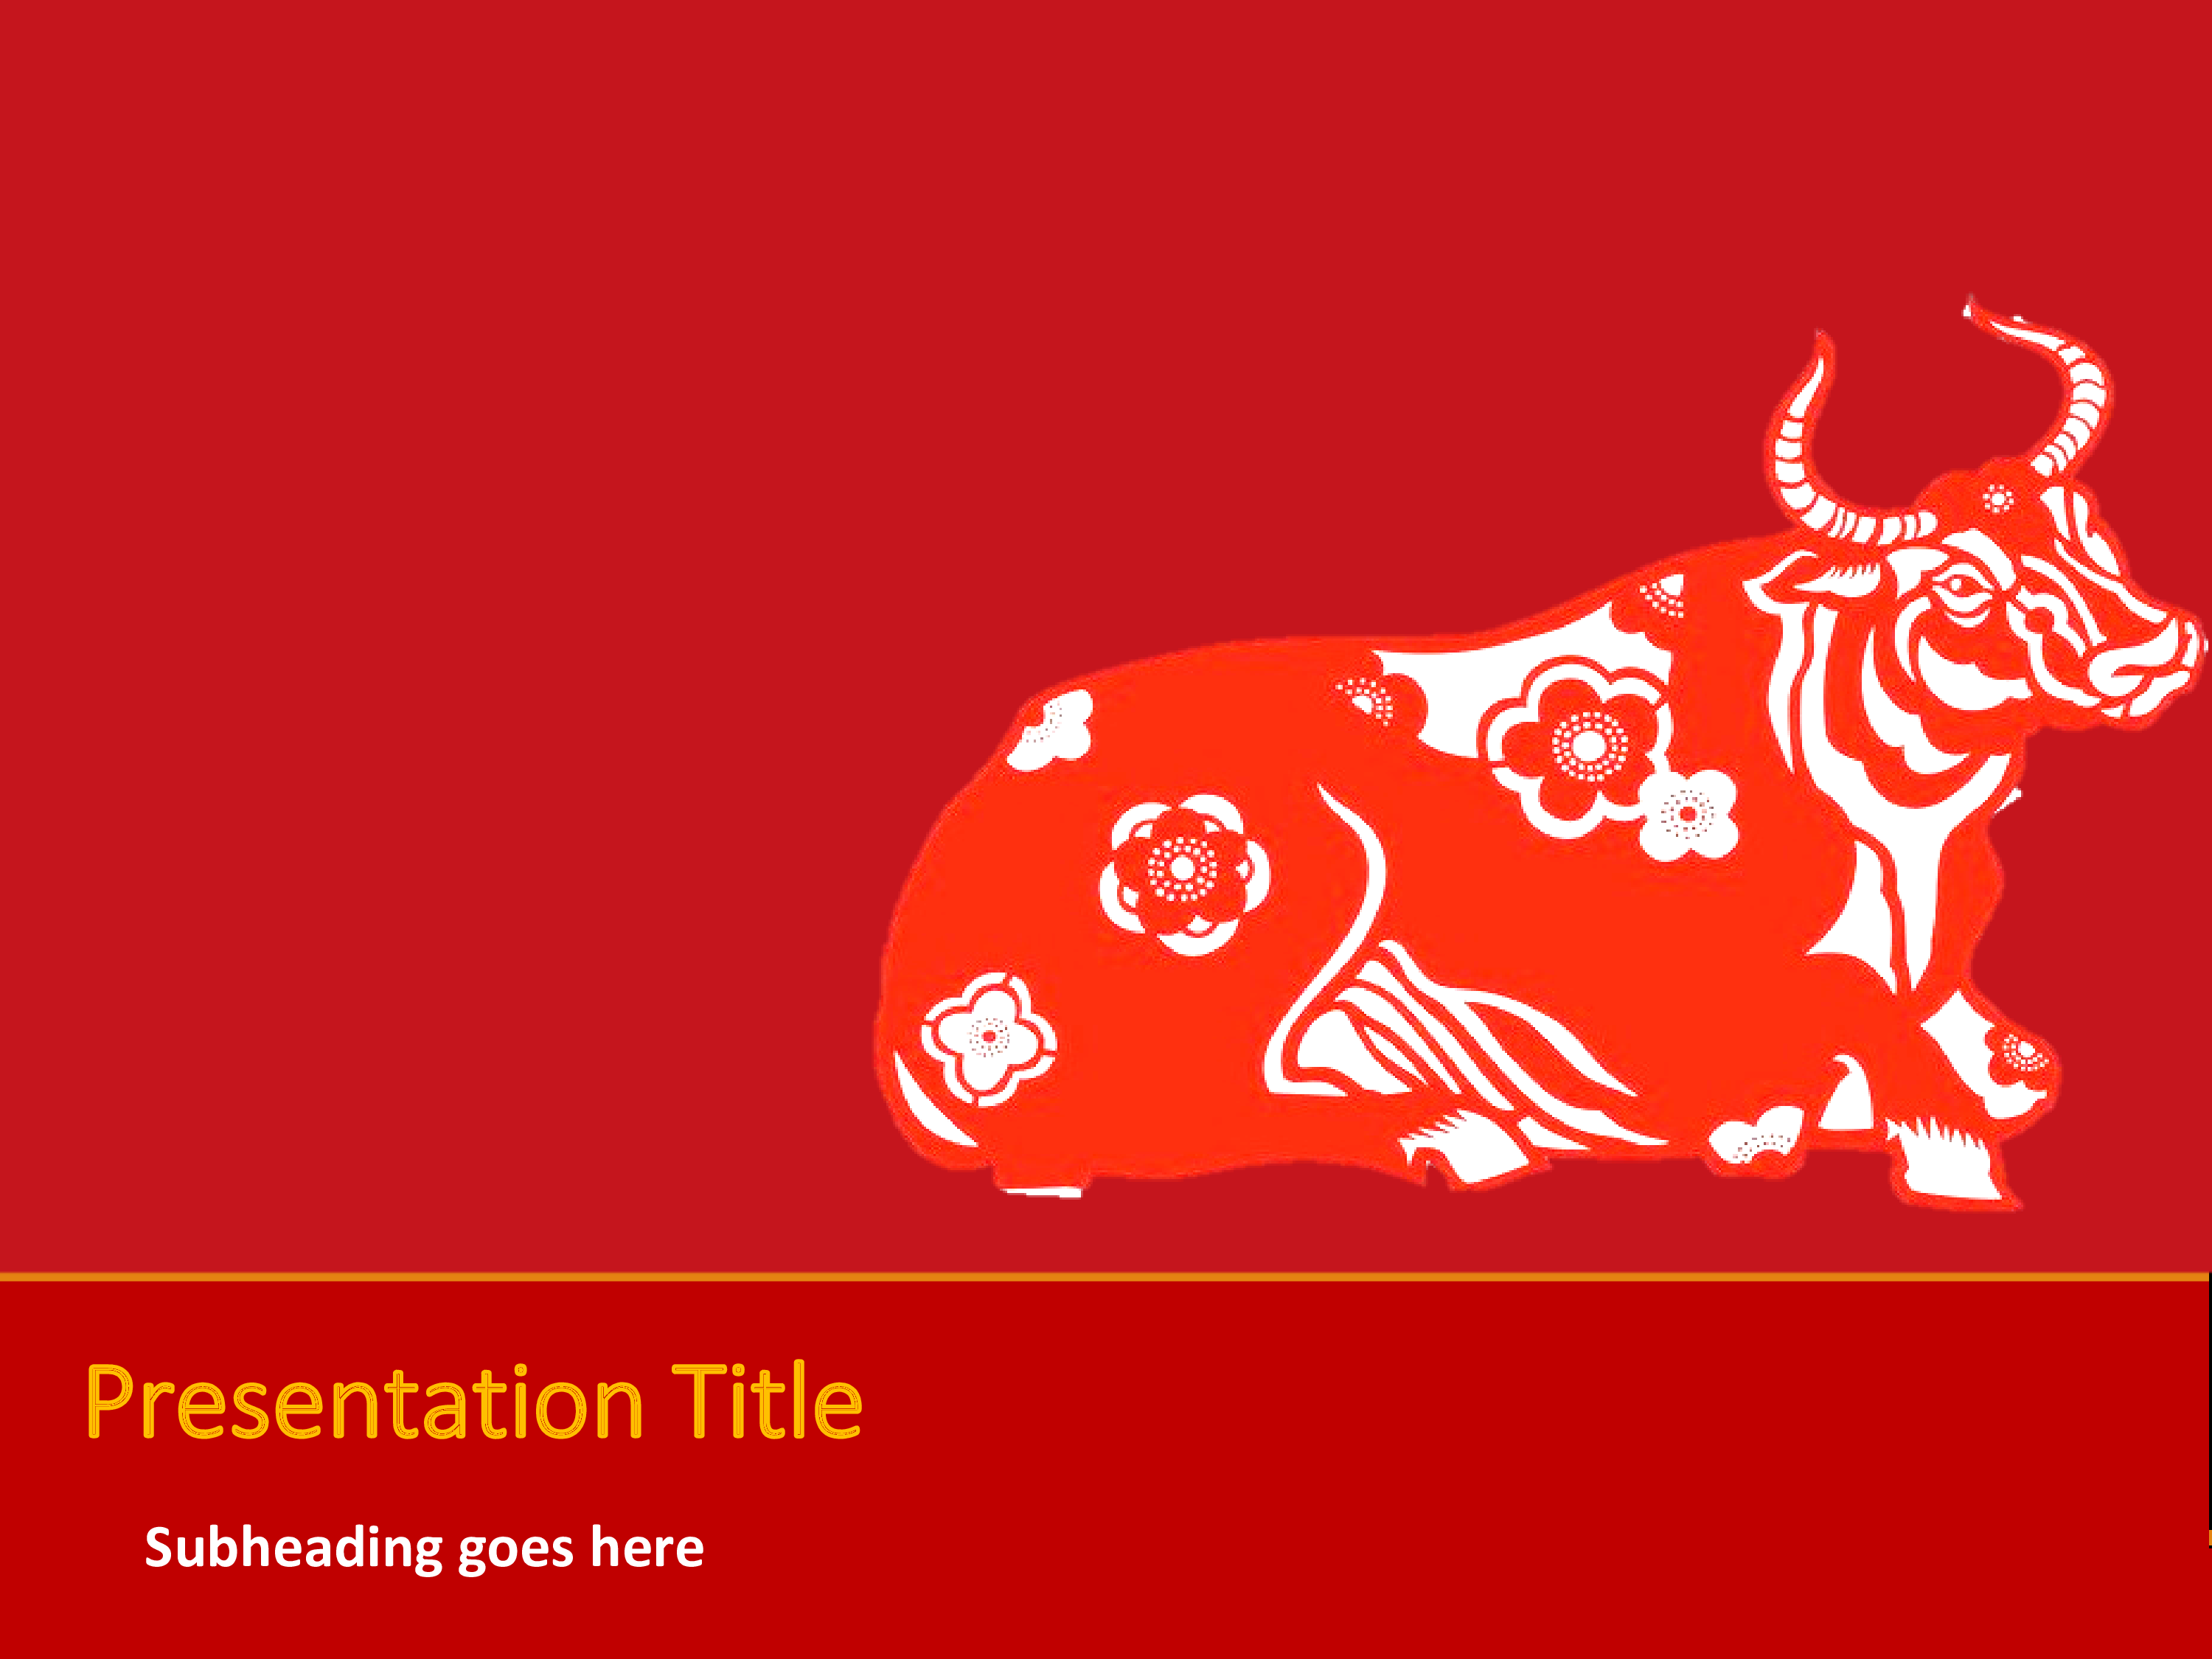 Chinese New Year 2021 Presentation | Templates at allbusinesstemplates.com